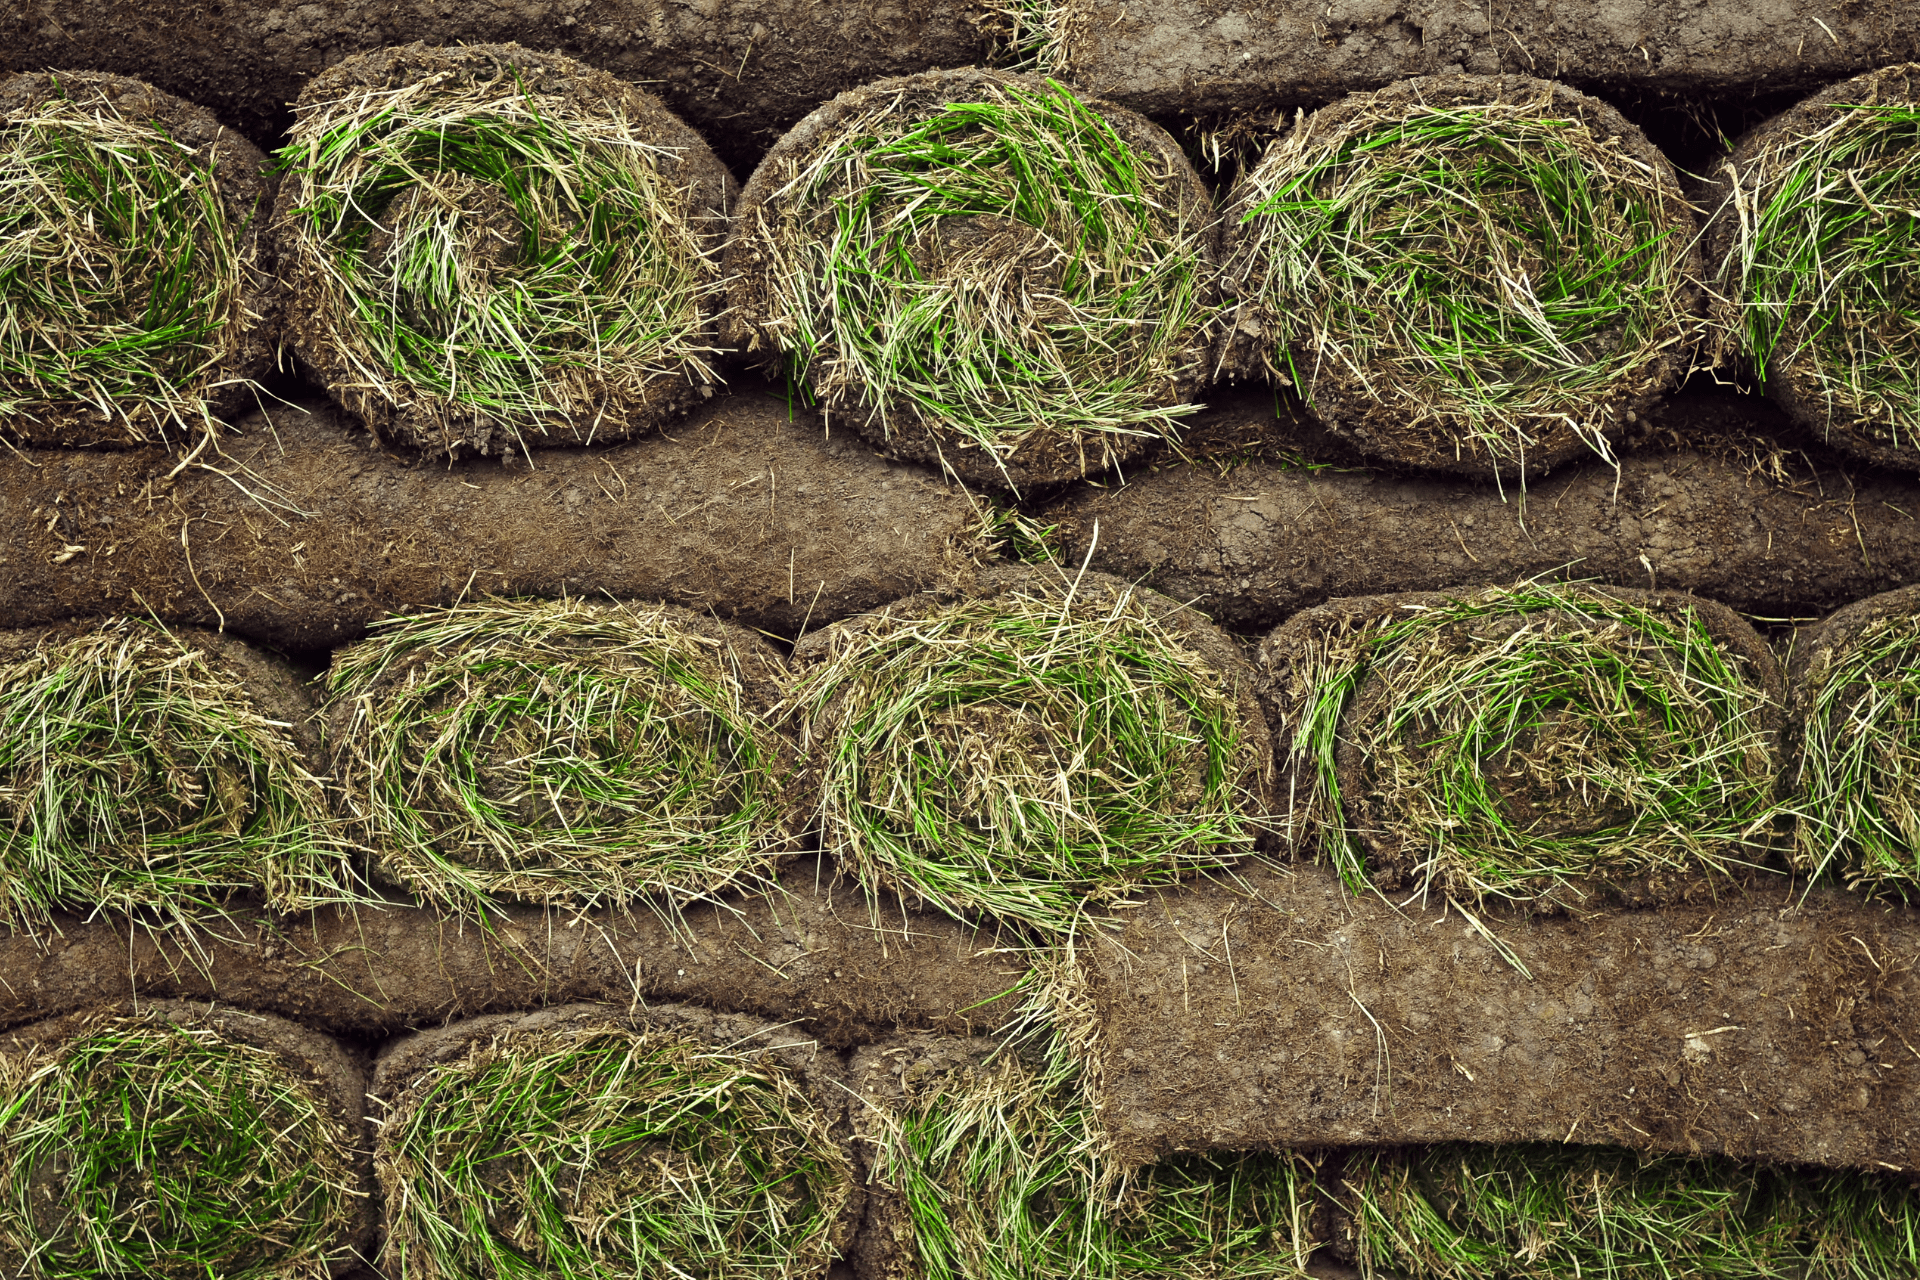 Rolled sod ready for installation, taken from the storeroom of Boise Landscaping Company